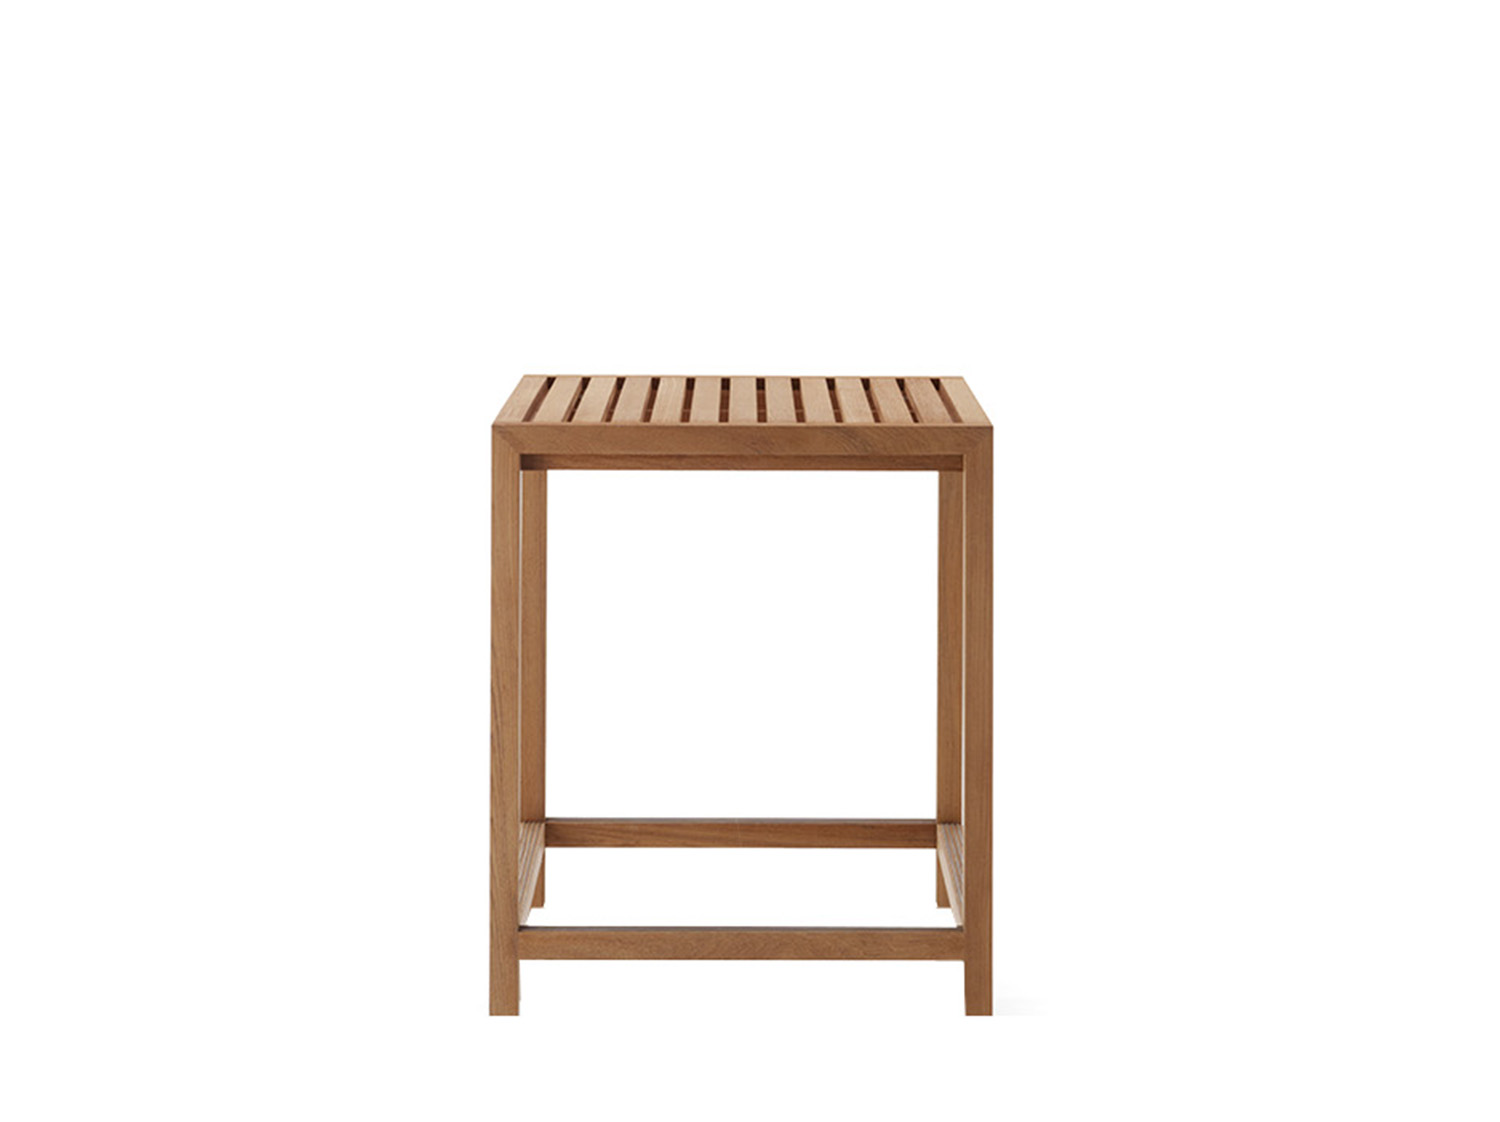 Product Image Plaza Counter Height Table